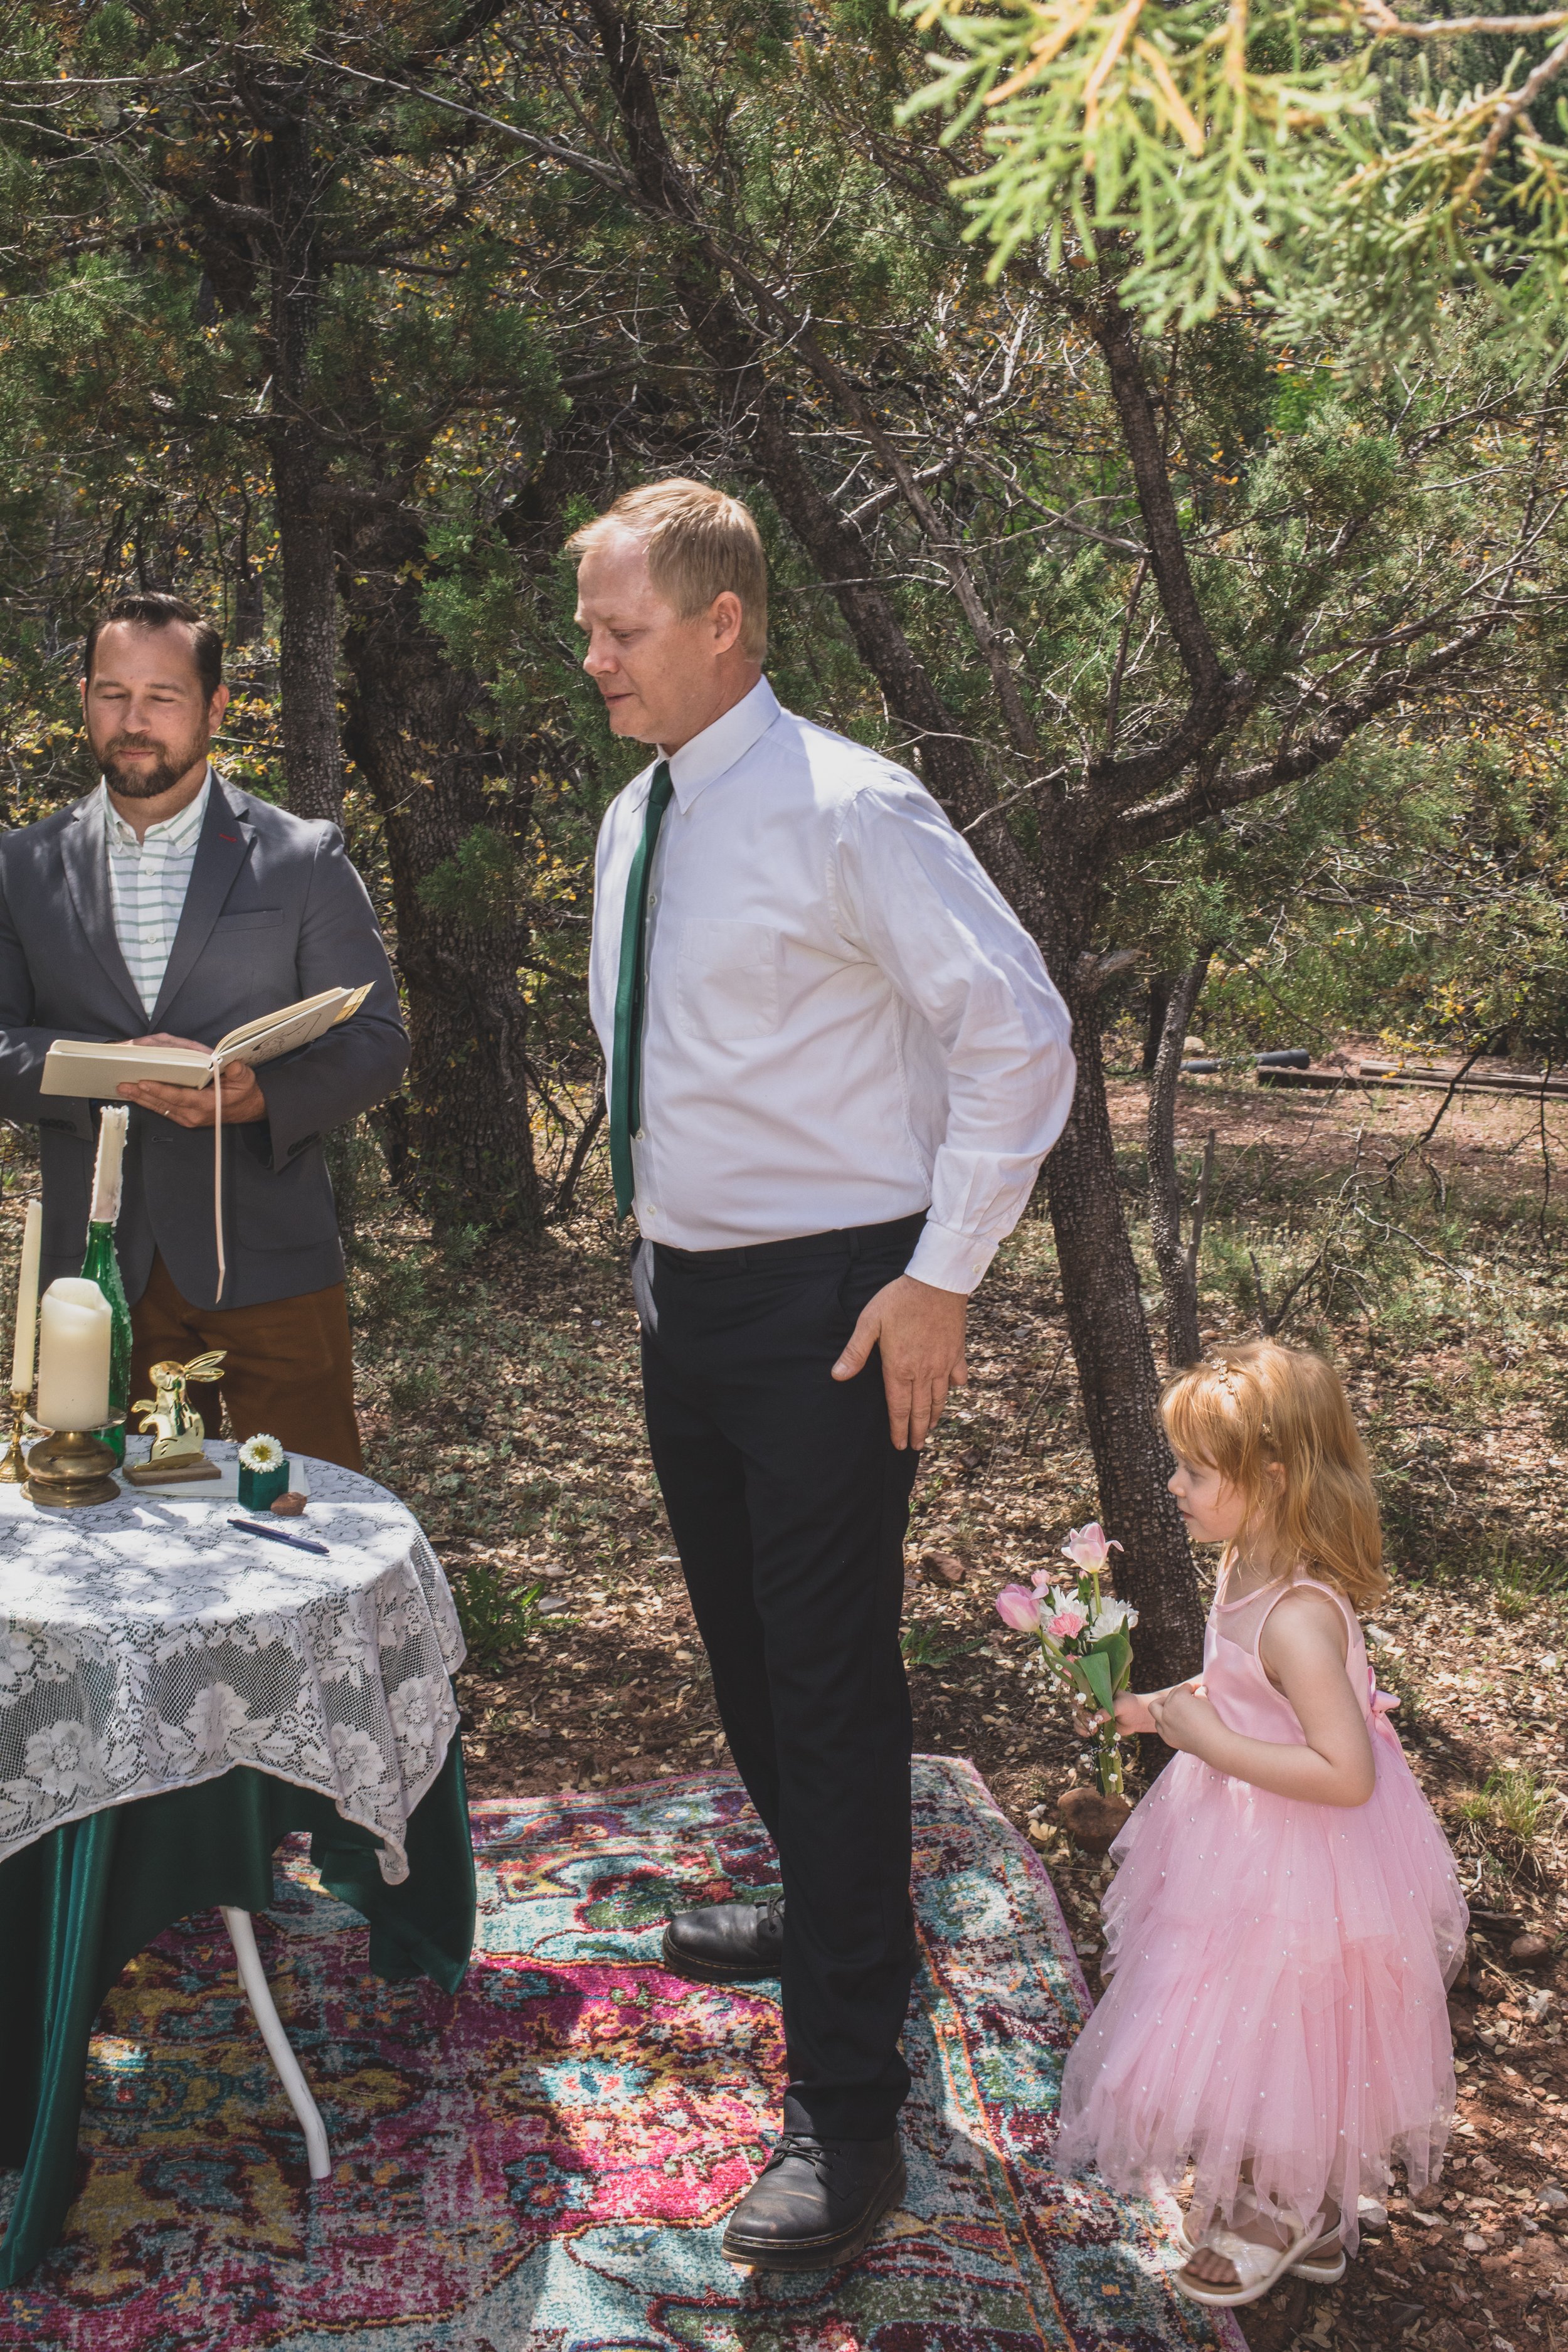 Groom and his daughter on his wedding day at their high noon desert elopement in Payson, Arizona by Arizona Elopement Photographer Jennifer Lind Schutsky.